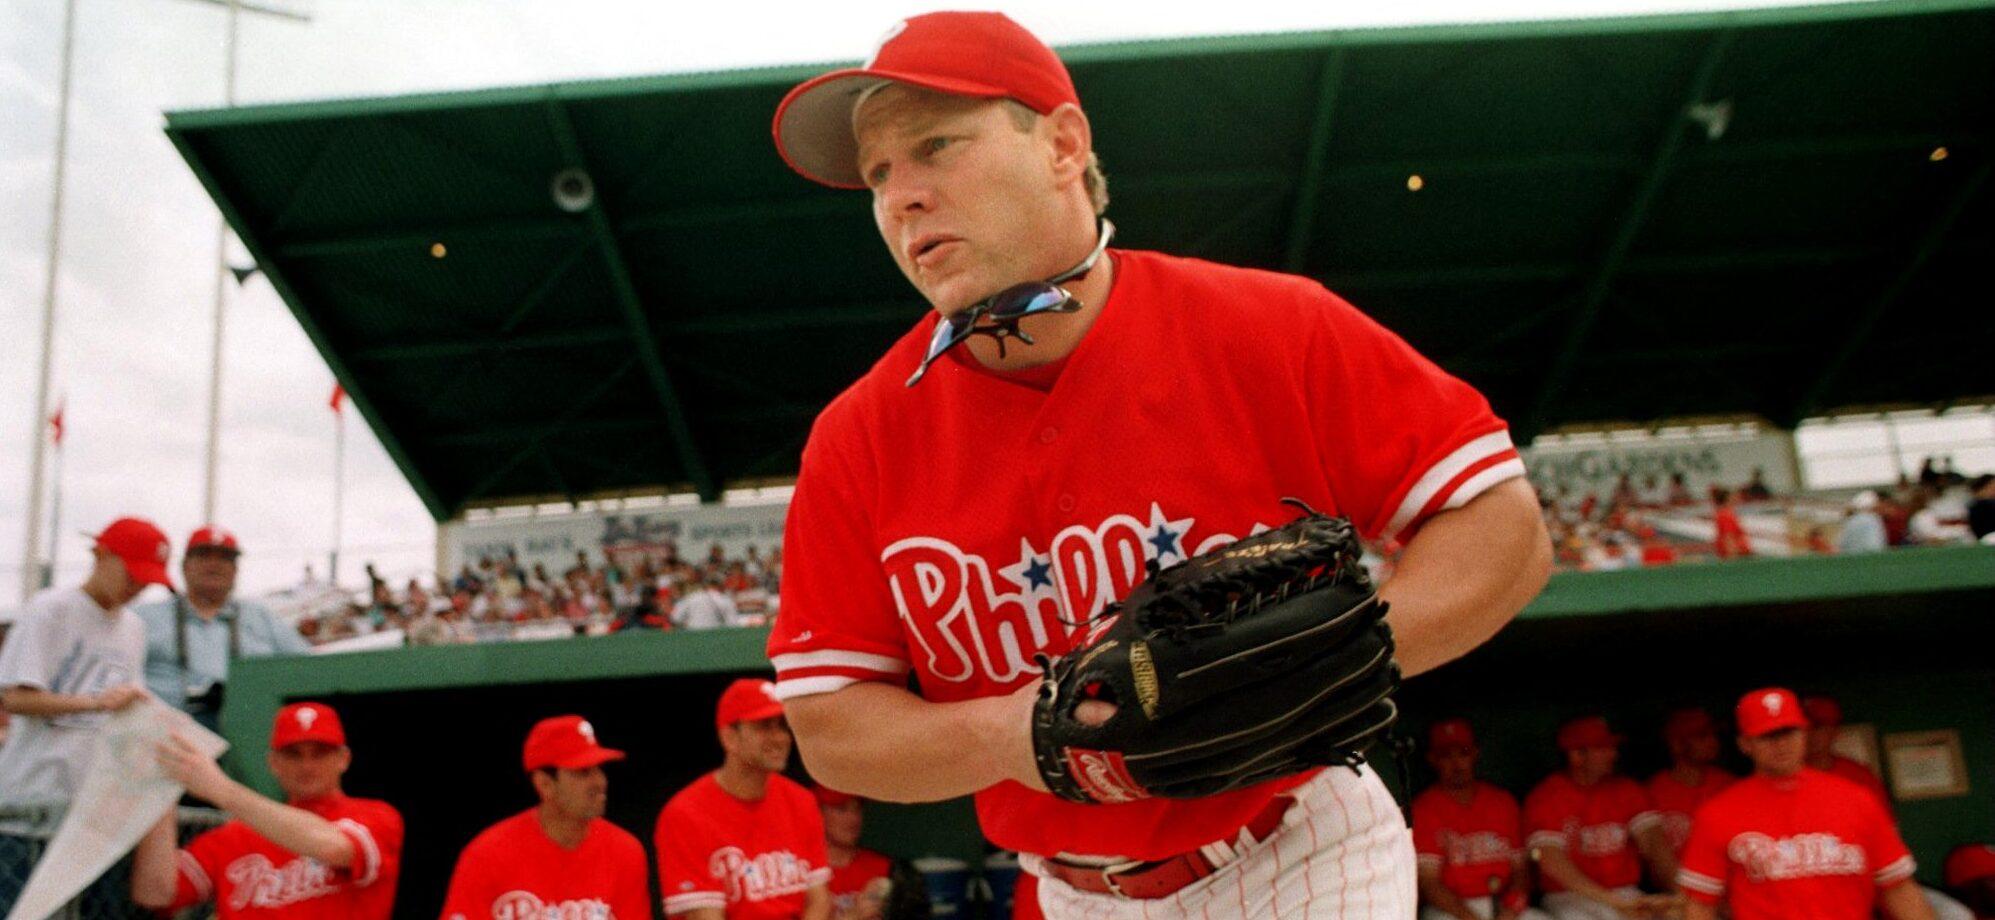 Mets' Lenny Dykstra Hospitalized For Stroke, 'In The Process Of Recovery'